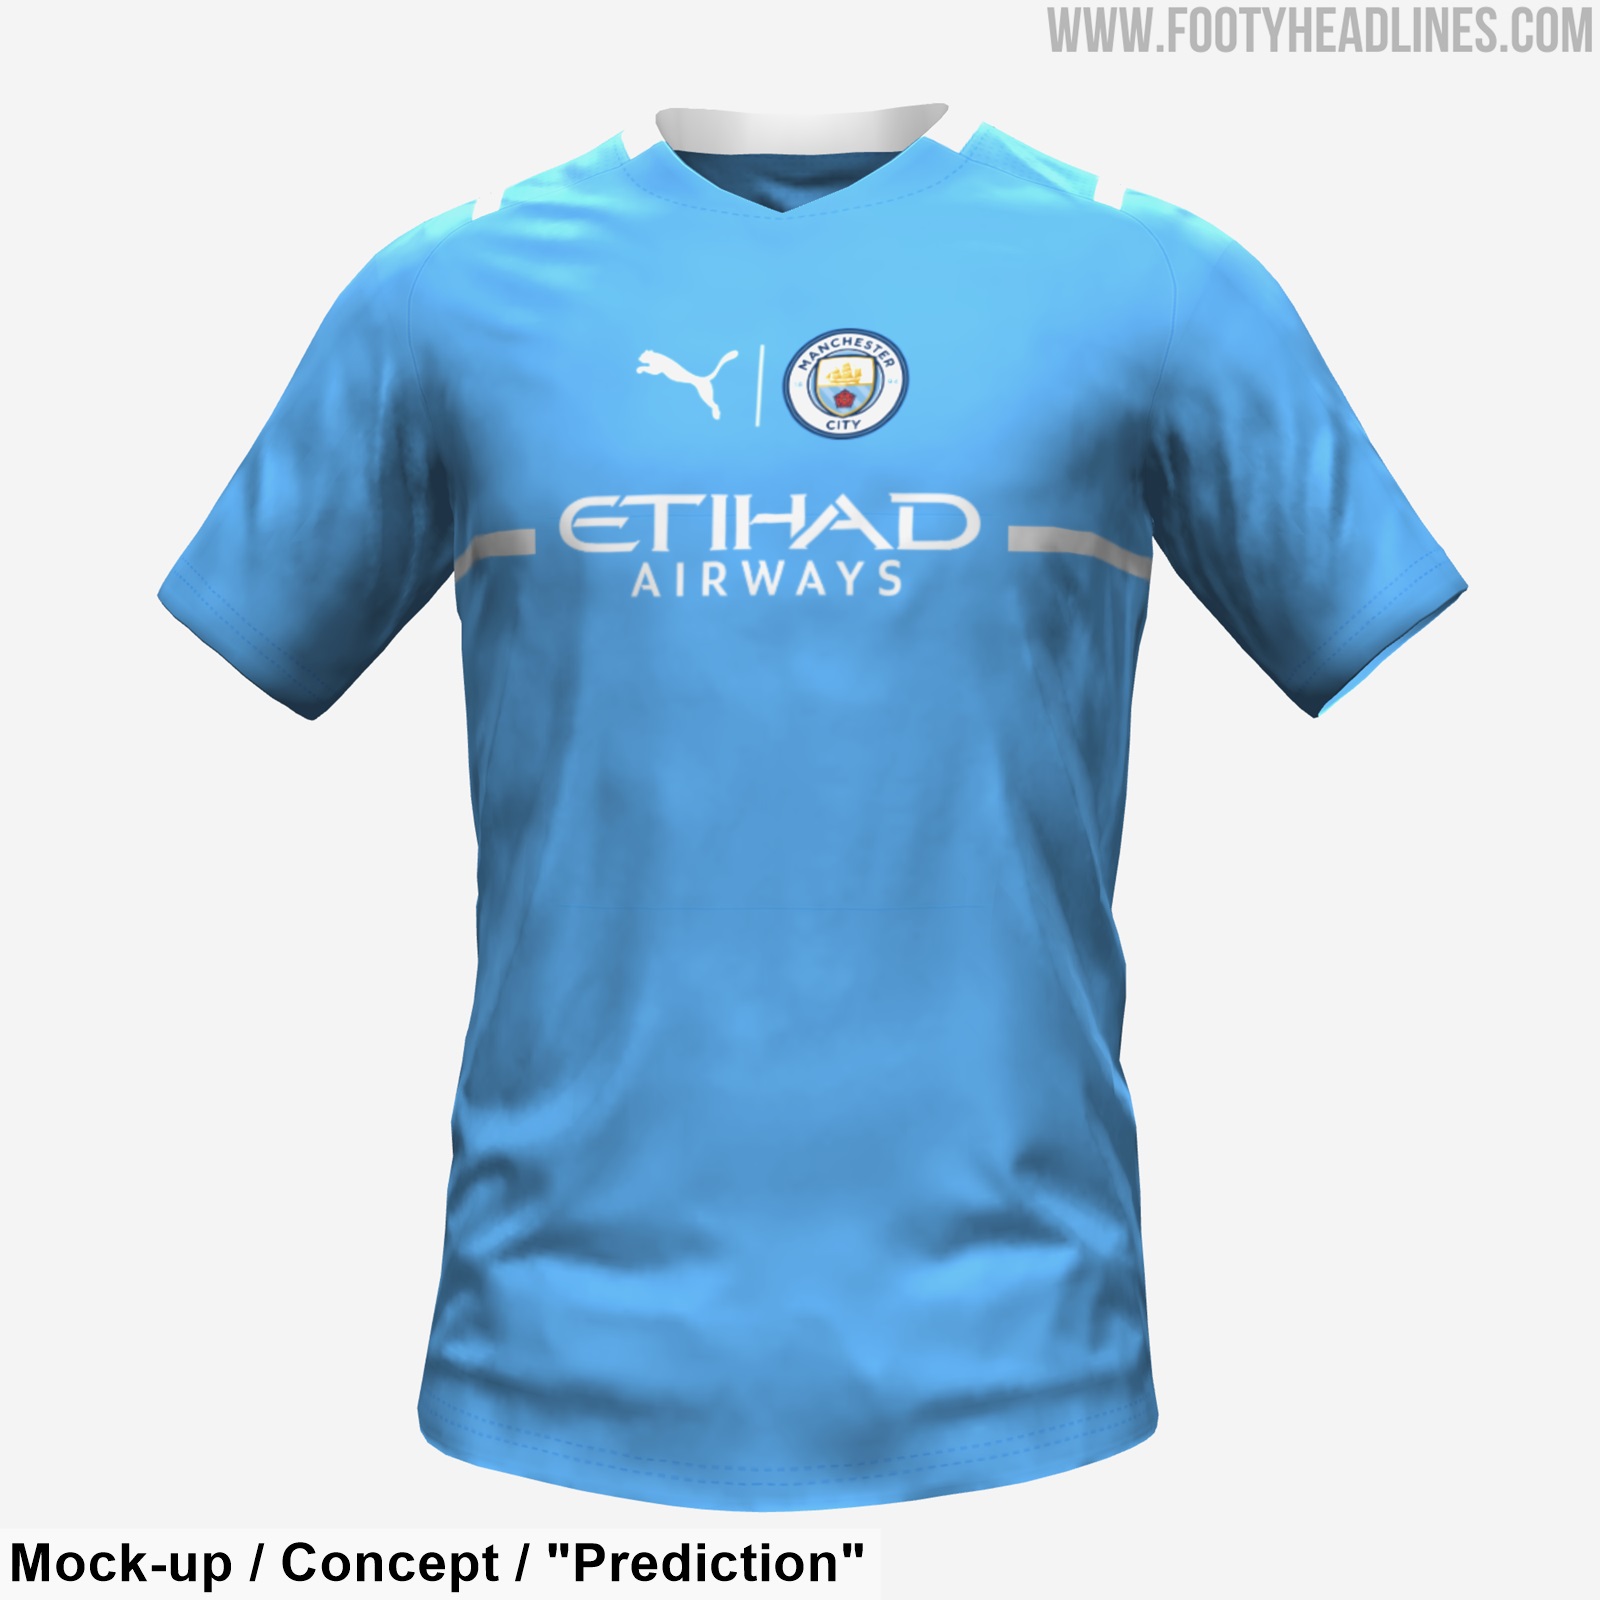 Puma Manchester City 21-22 Home Kit To Look Like This? - Footy Headlines